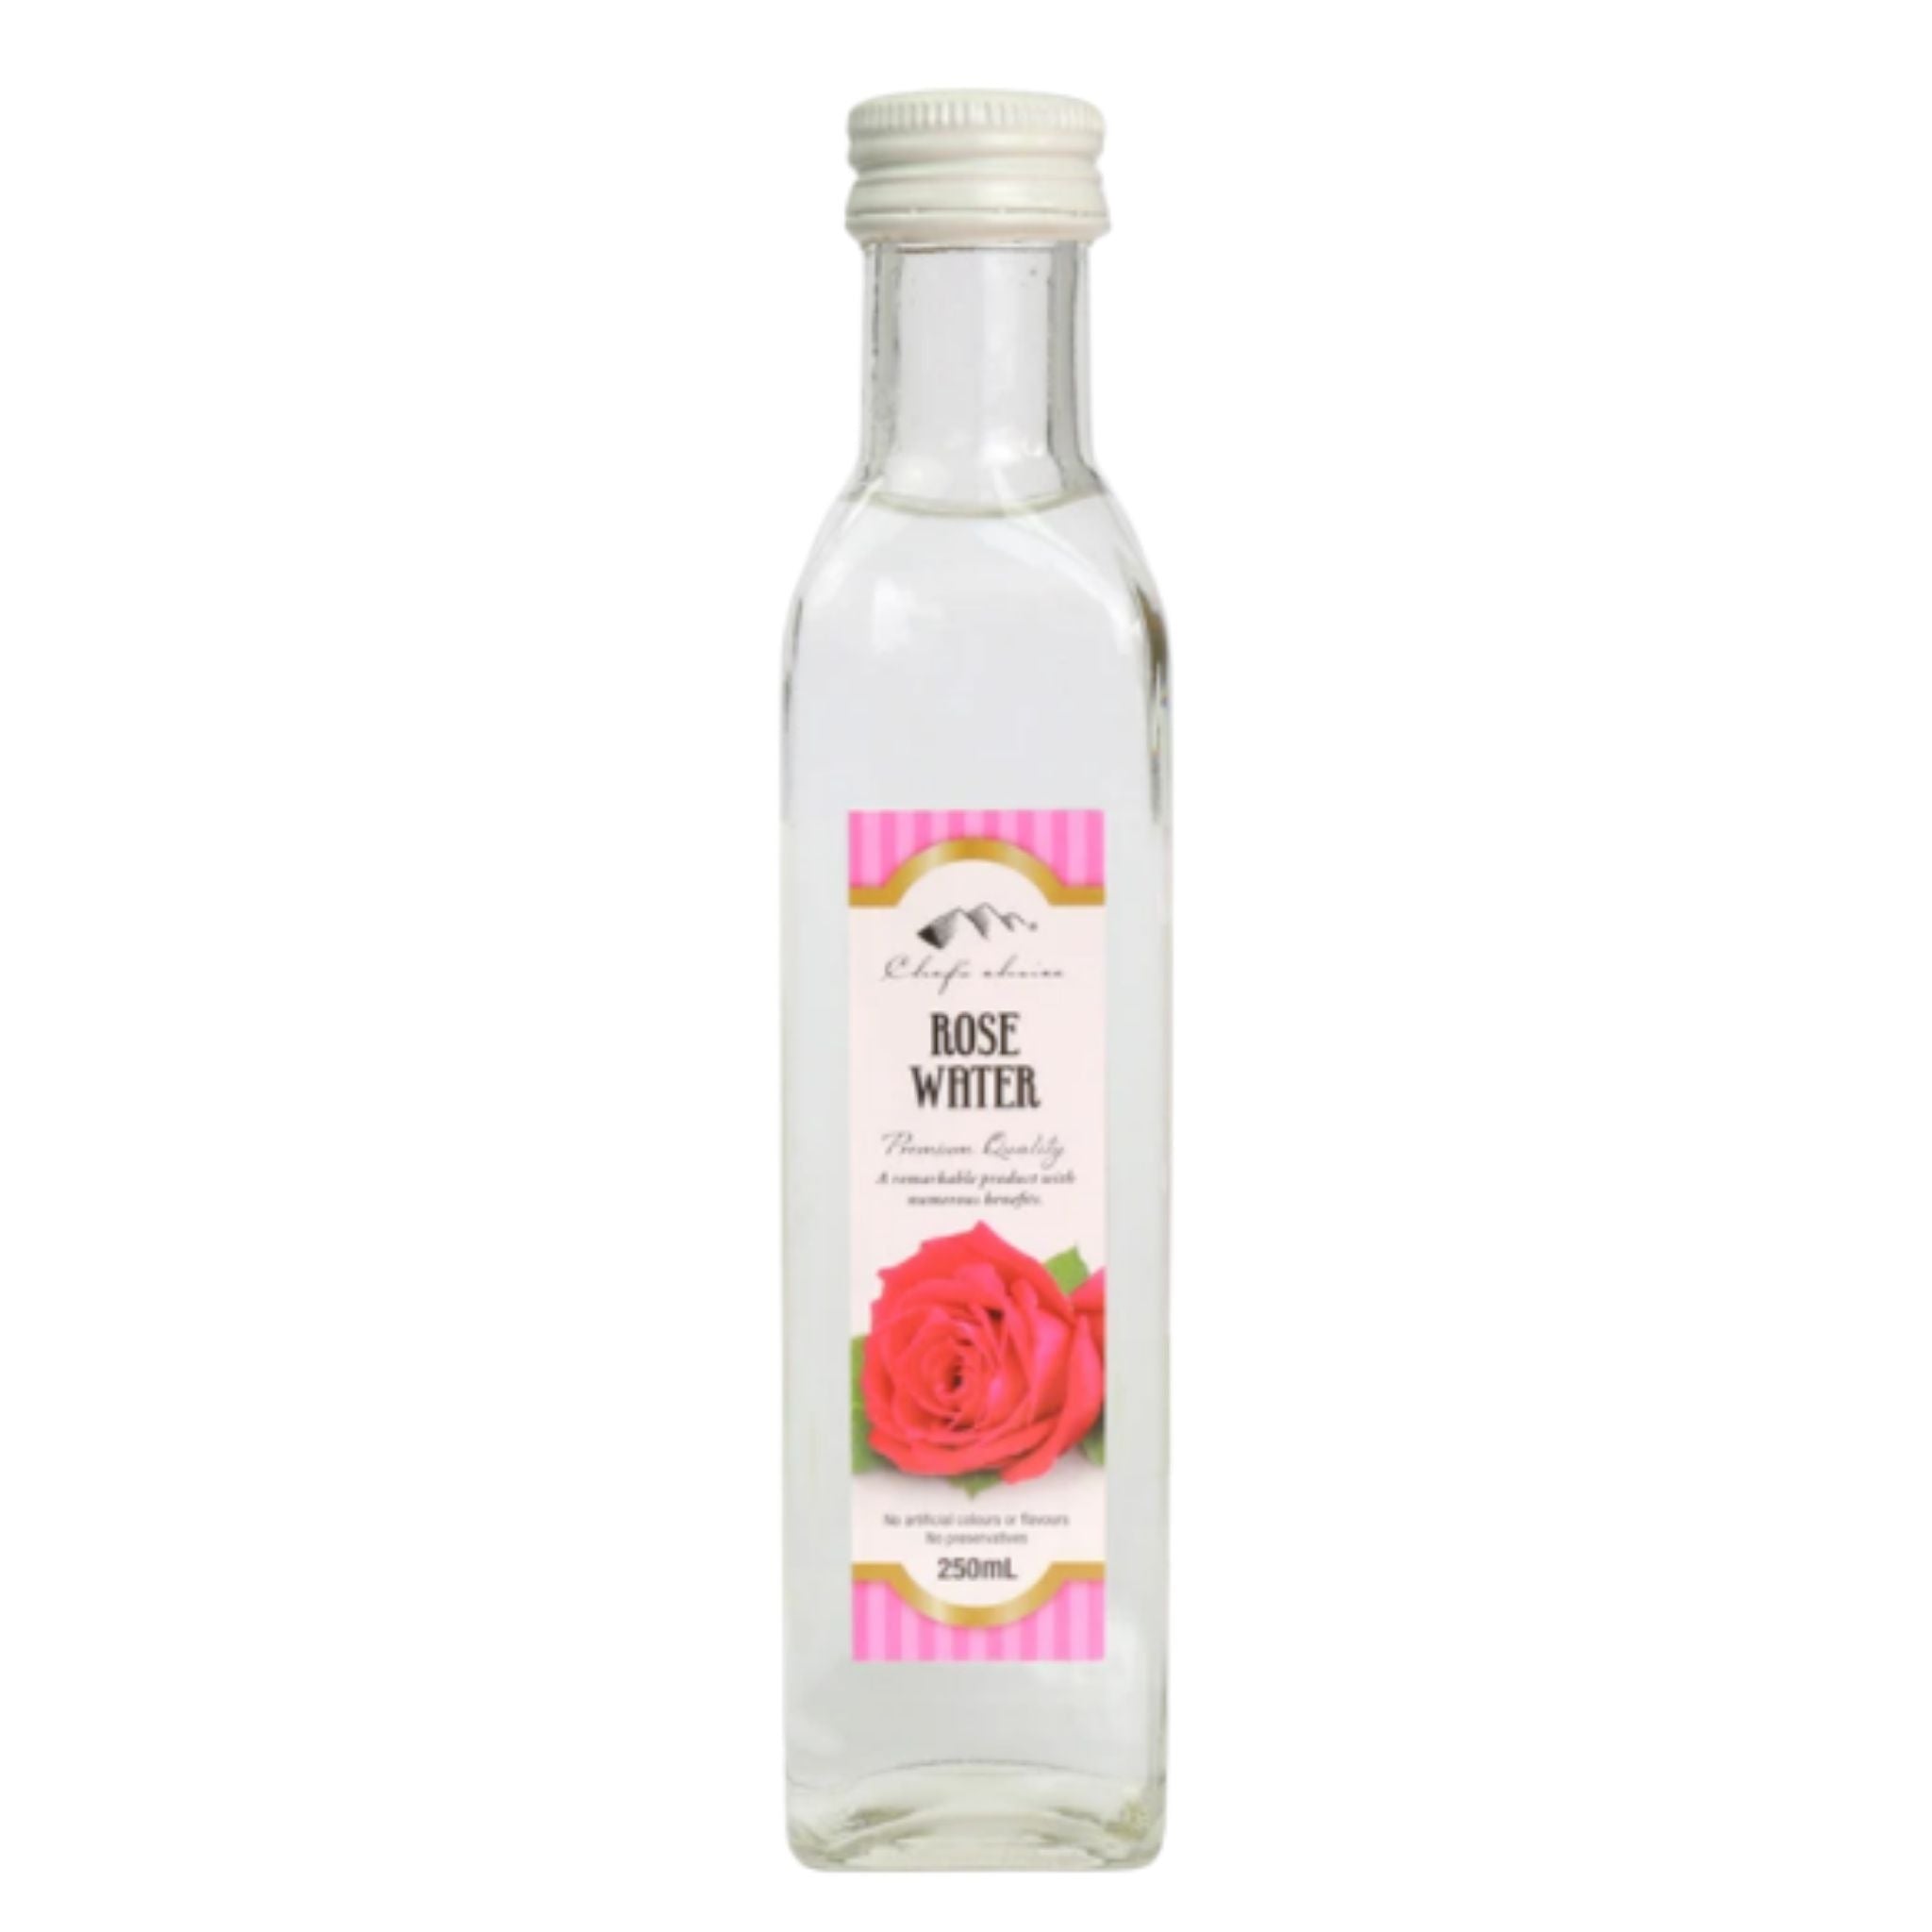 Rose Water - Chefs Choice. 250ml